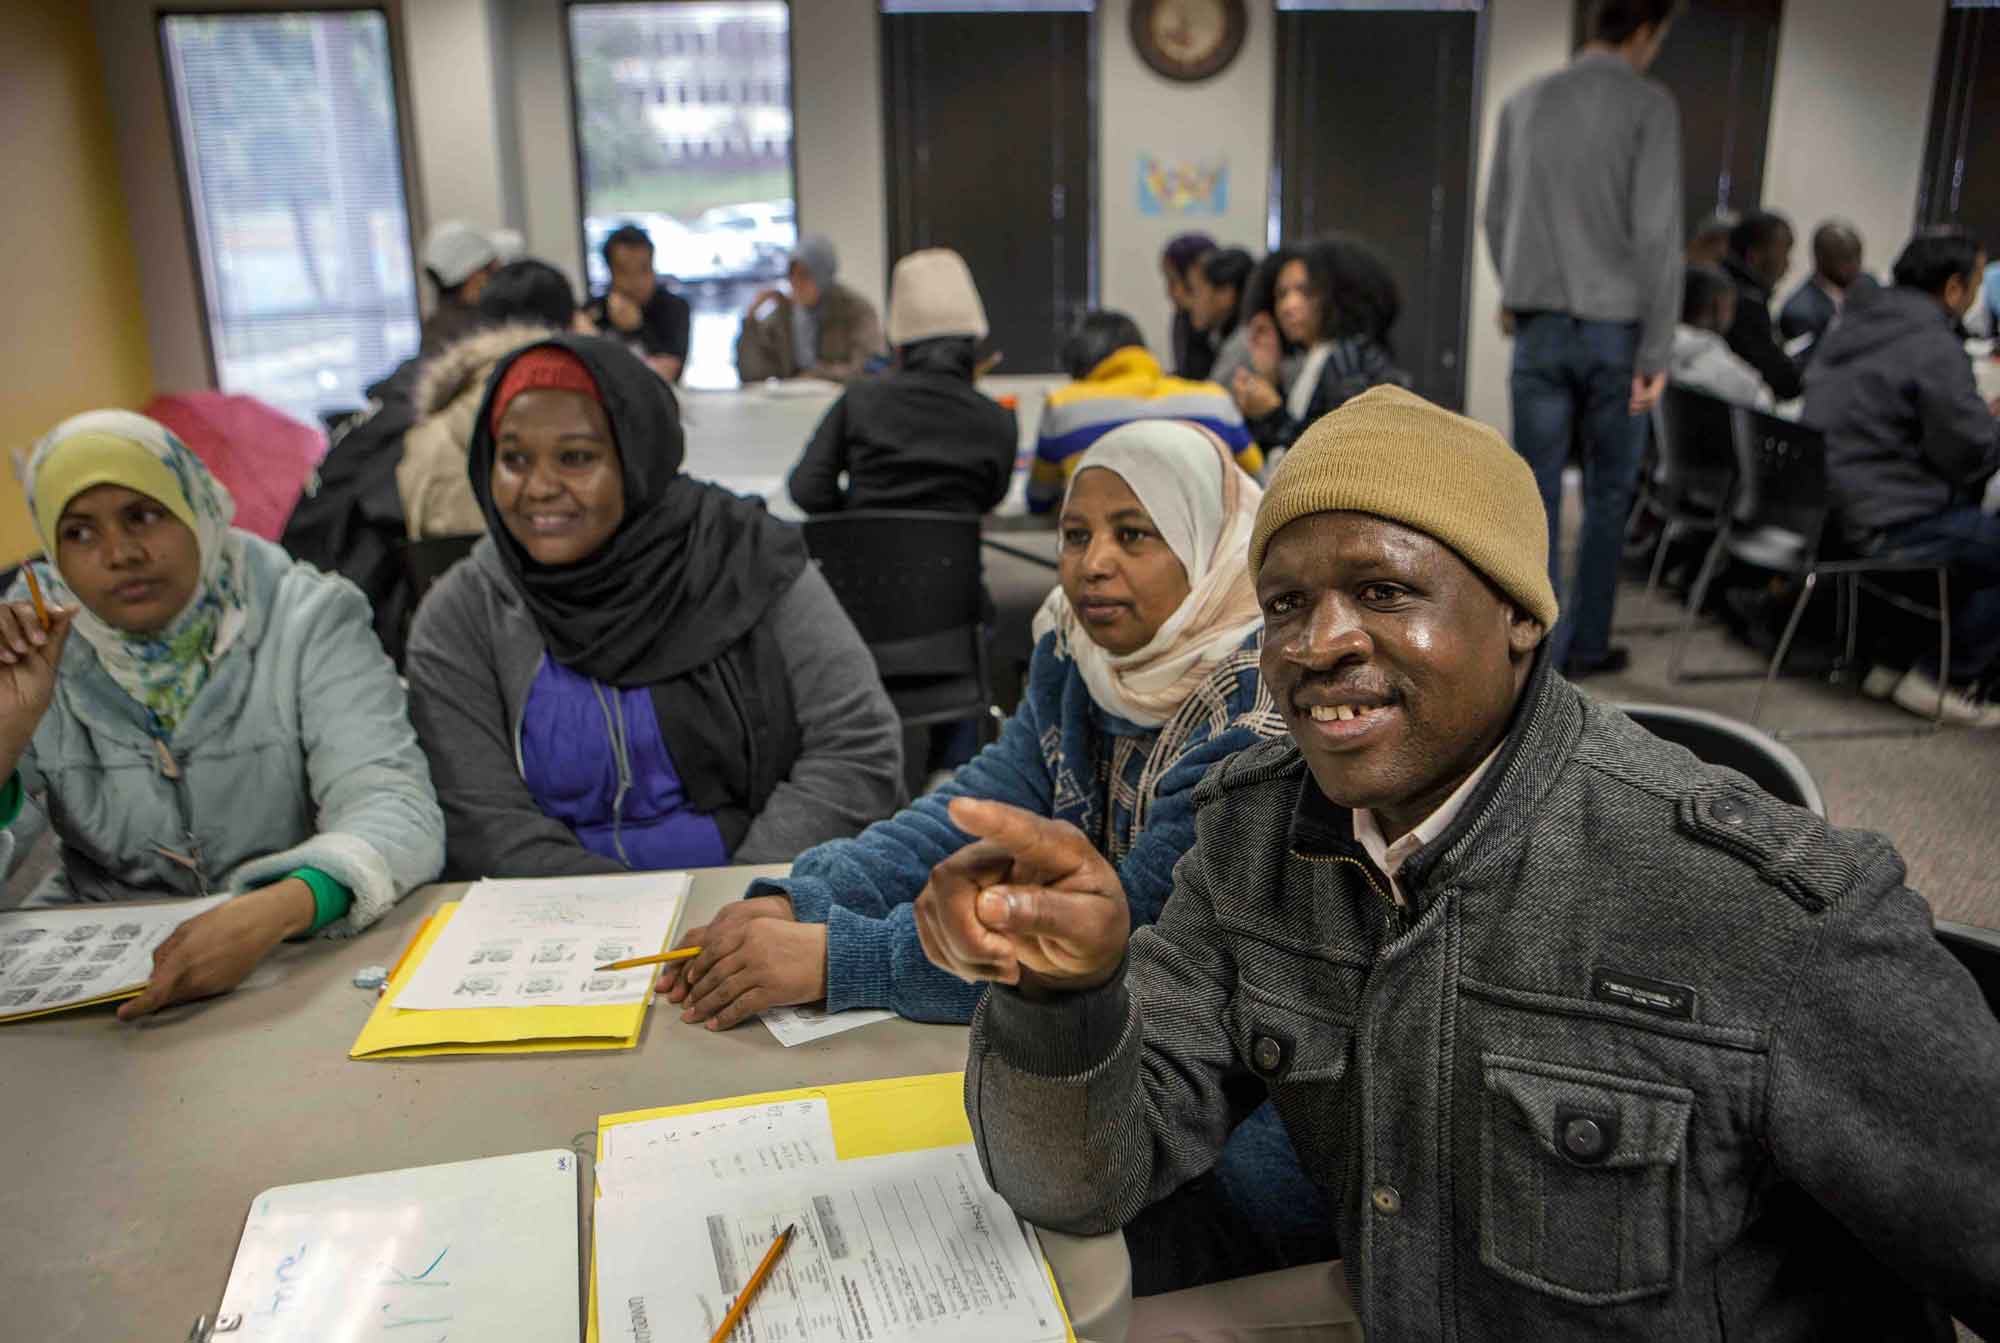 Recently resettled refugees learning English at their local resettlement agency